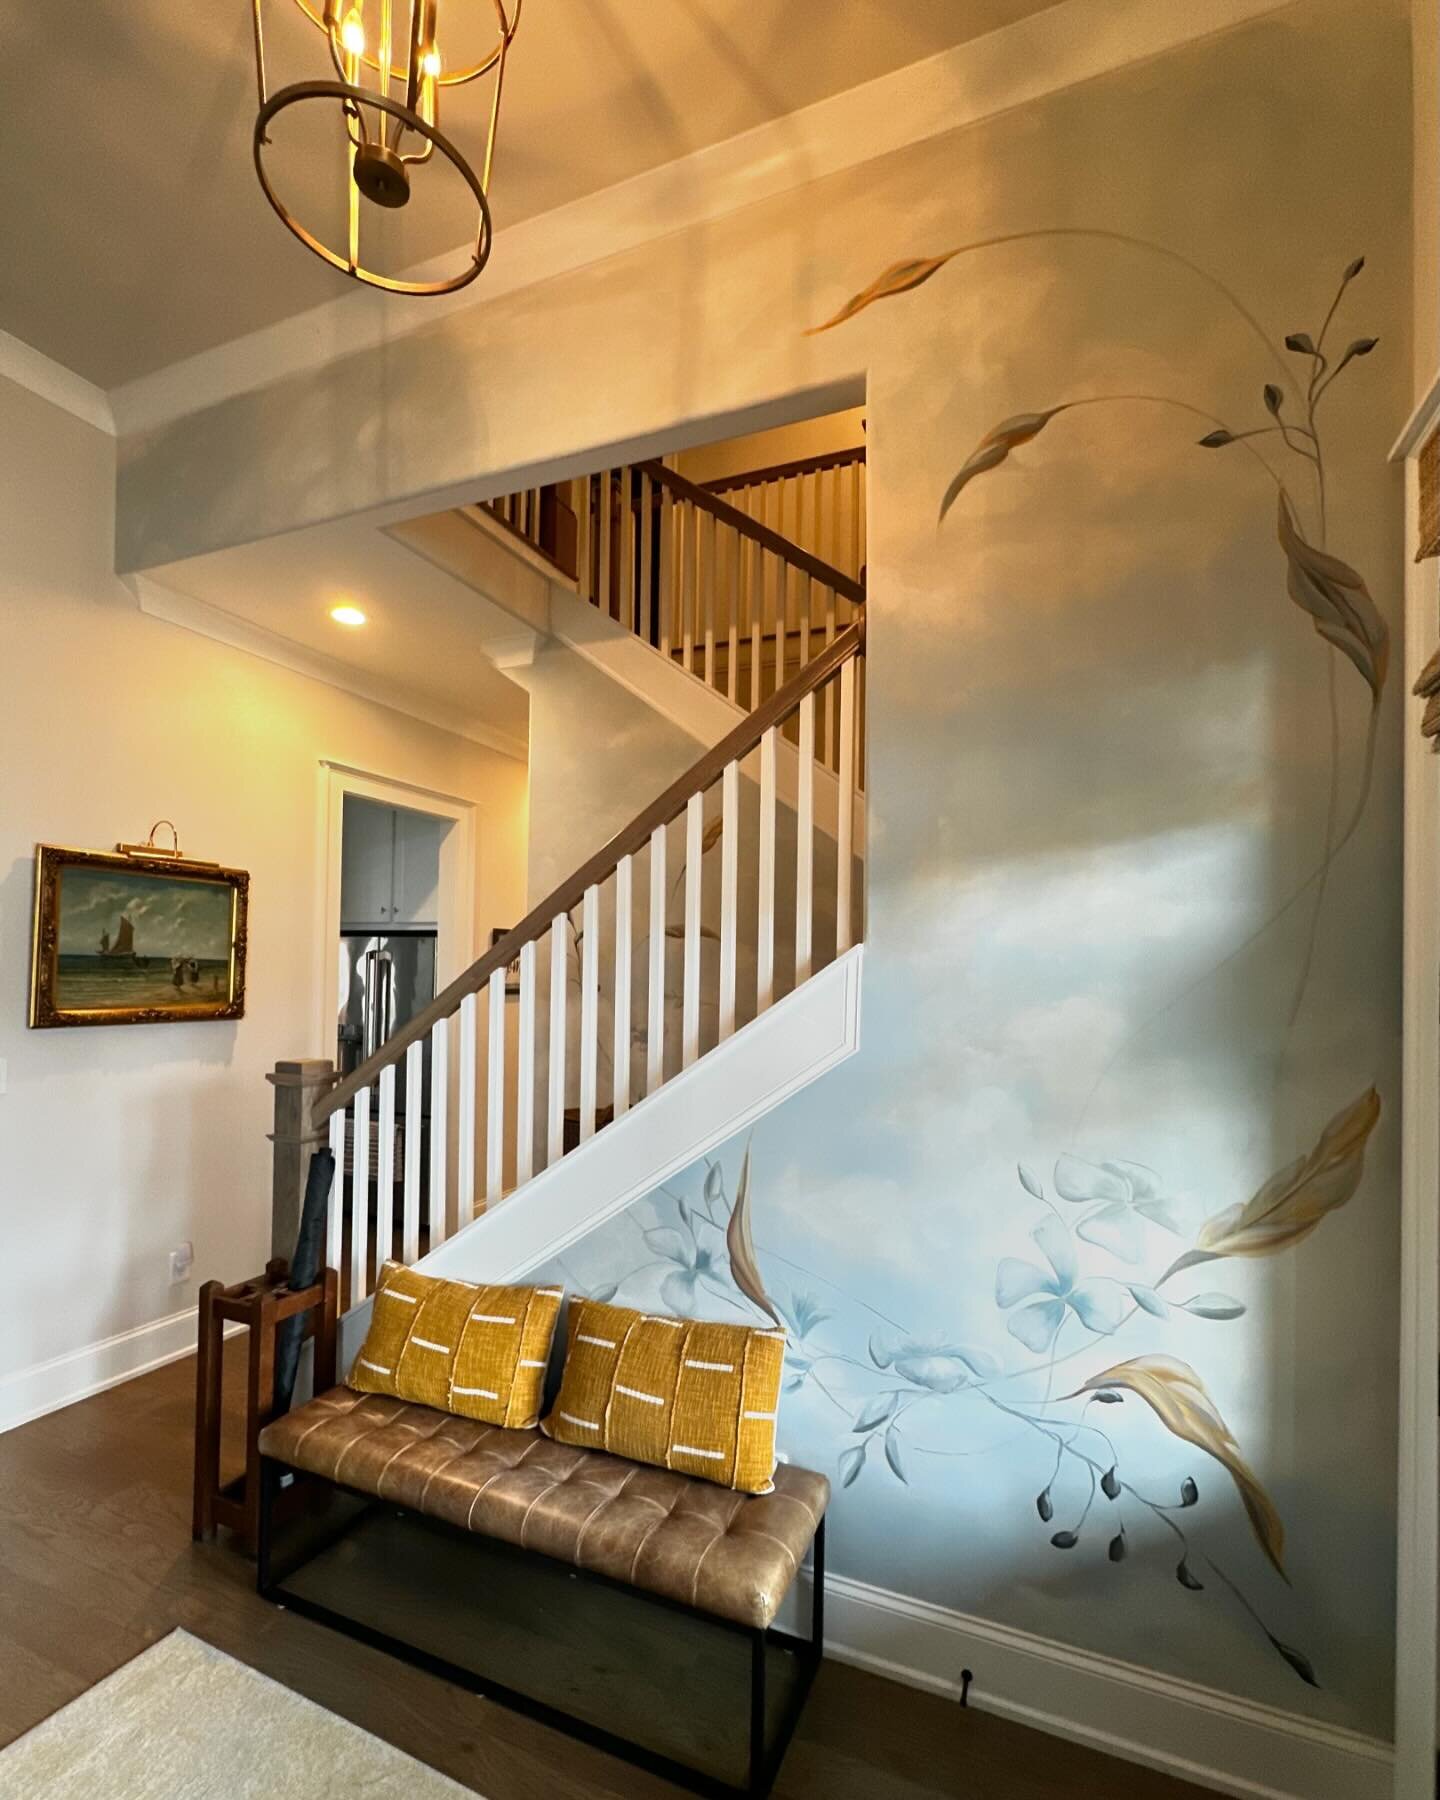 I&rsquo;ve always wanted to try my hand at some clouds in a mural. ☁️🤍 Then add some flowers and leaves, and it all comes together for a one of a kind artwork in this foyer.

It took many layers to get this renaissance-esque sky just right before pa